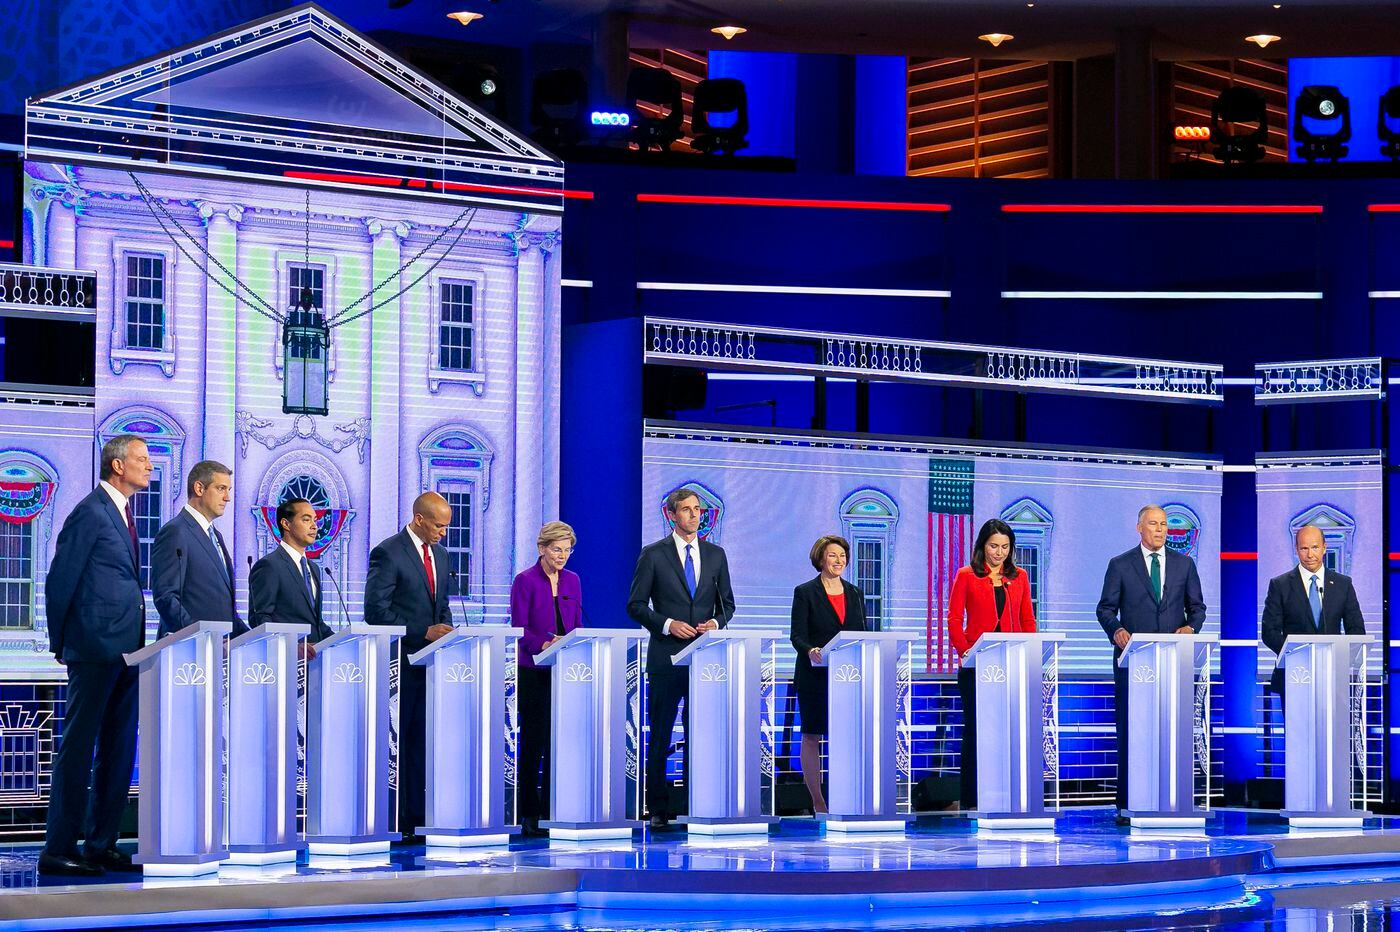 Questions for the 2020 Democratic candidates | George Will